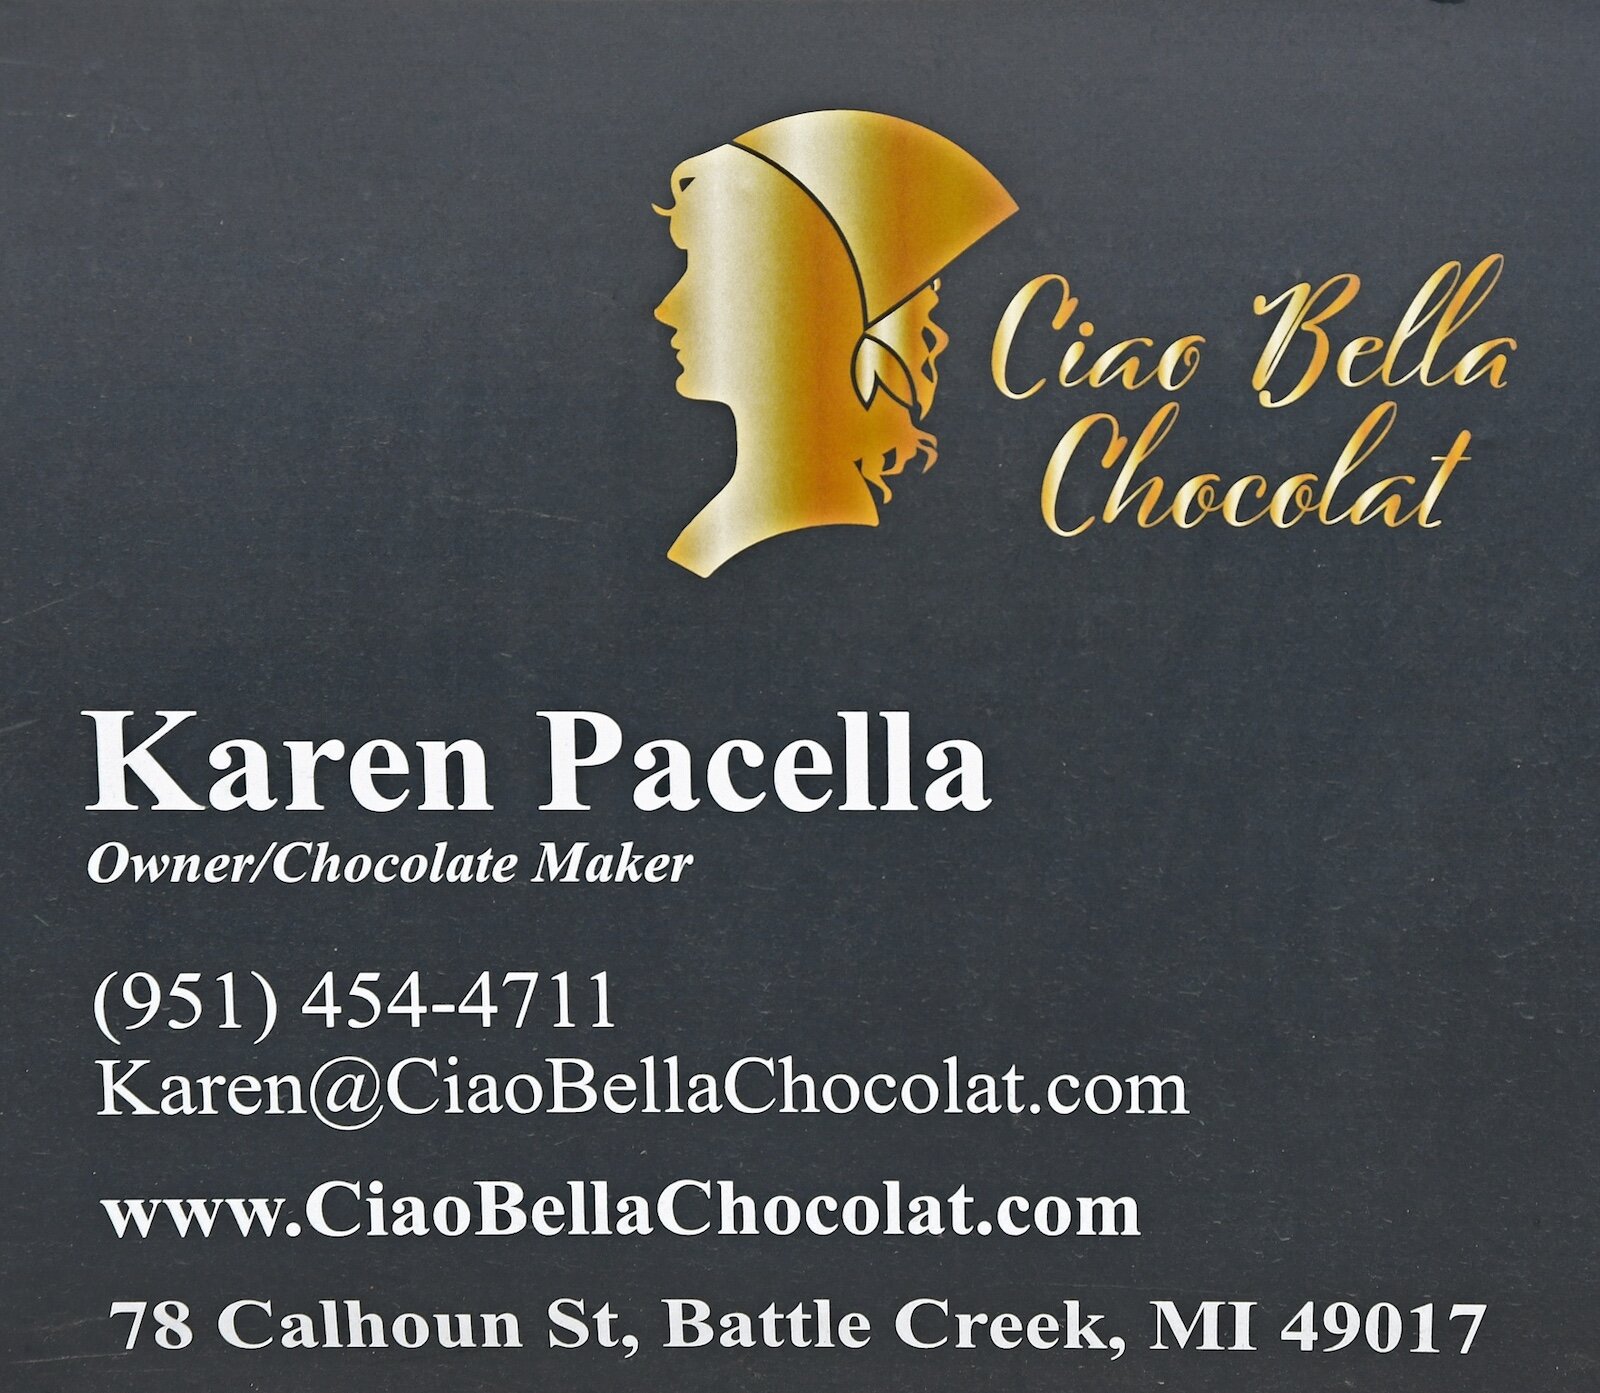 Ciao Bella Chocolat is owned by Karen Pacella.